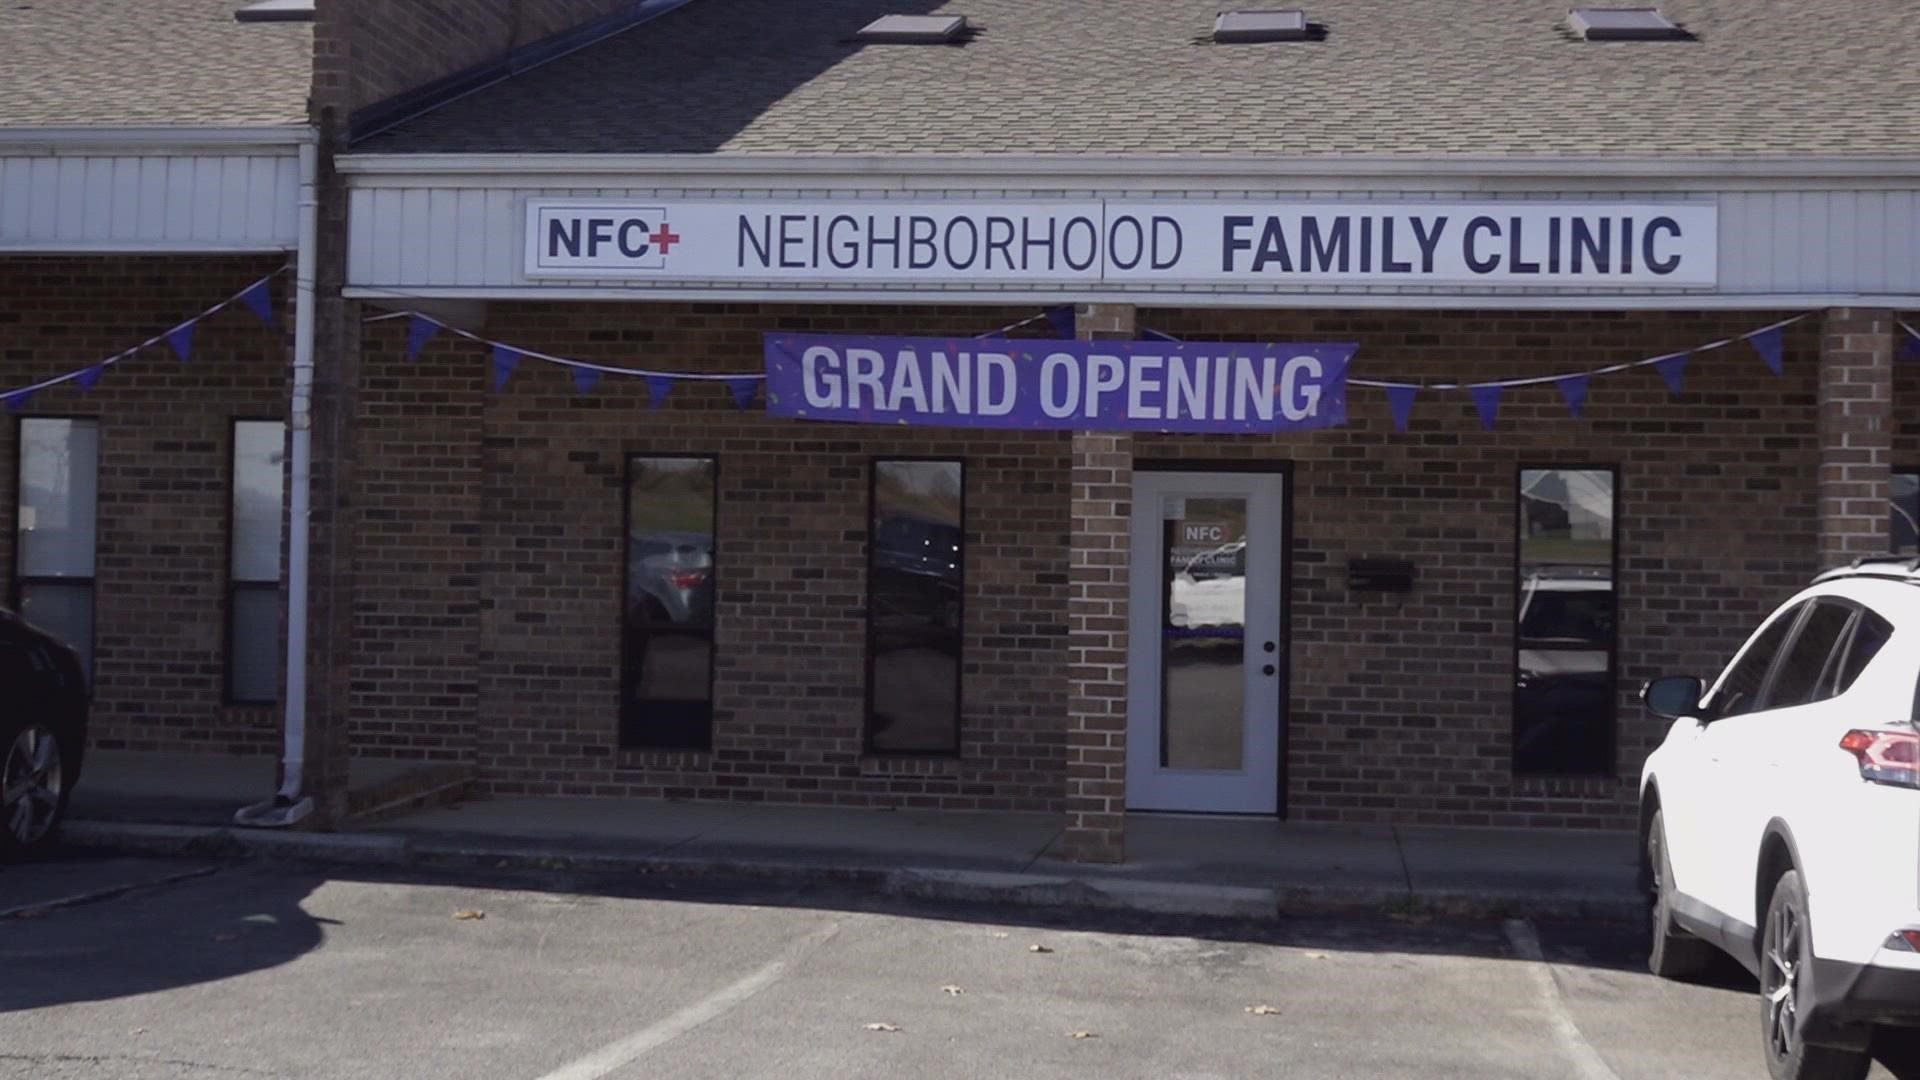 The Neighborhood Family Clinic offers a range of services at a lower published price.